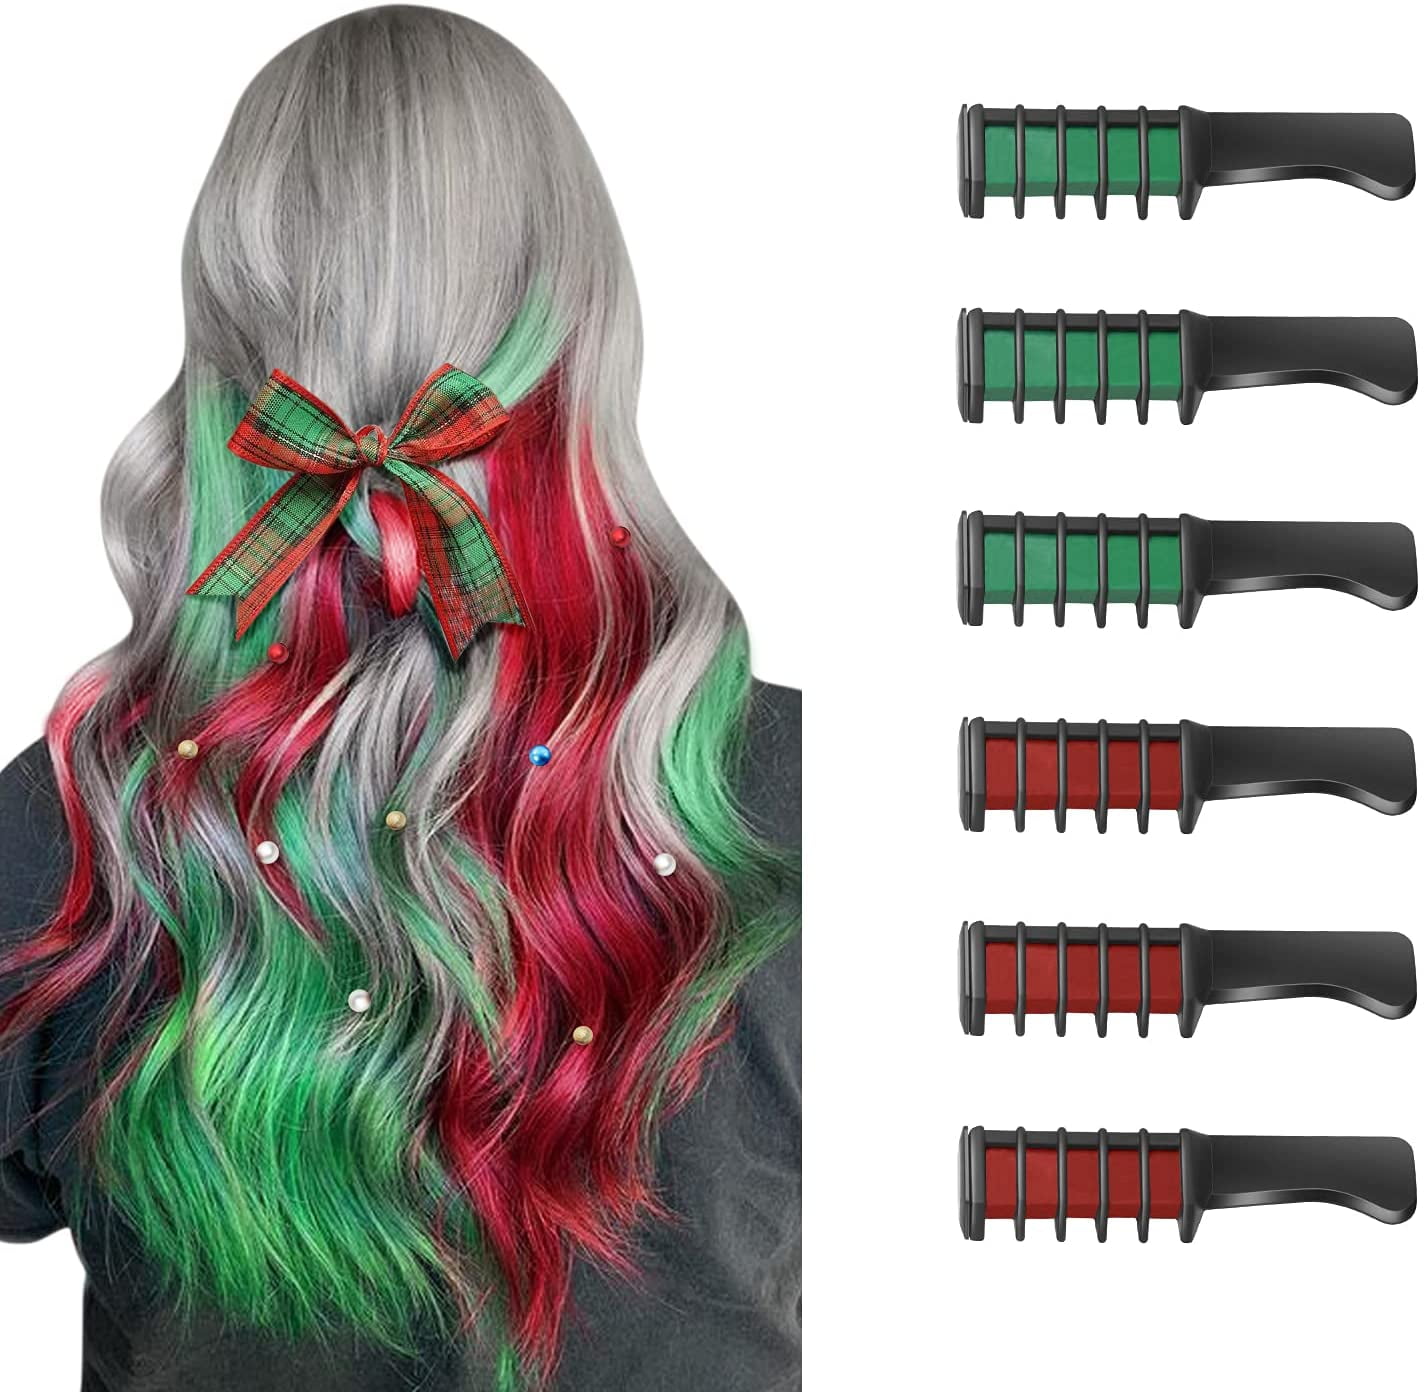 Supplier of Hair Chalk Comb from Shijiazhuang China by  ShijiazhuangDitiantaiElectronicCommerceCoLtd